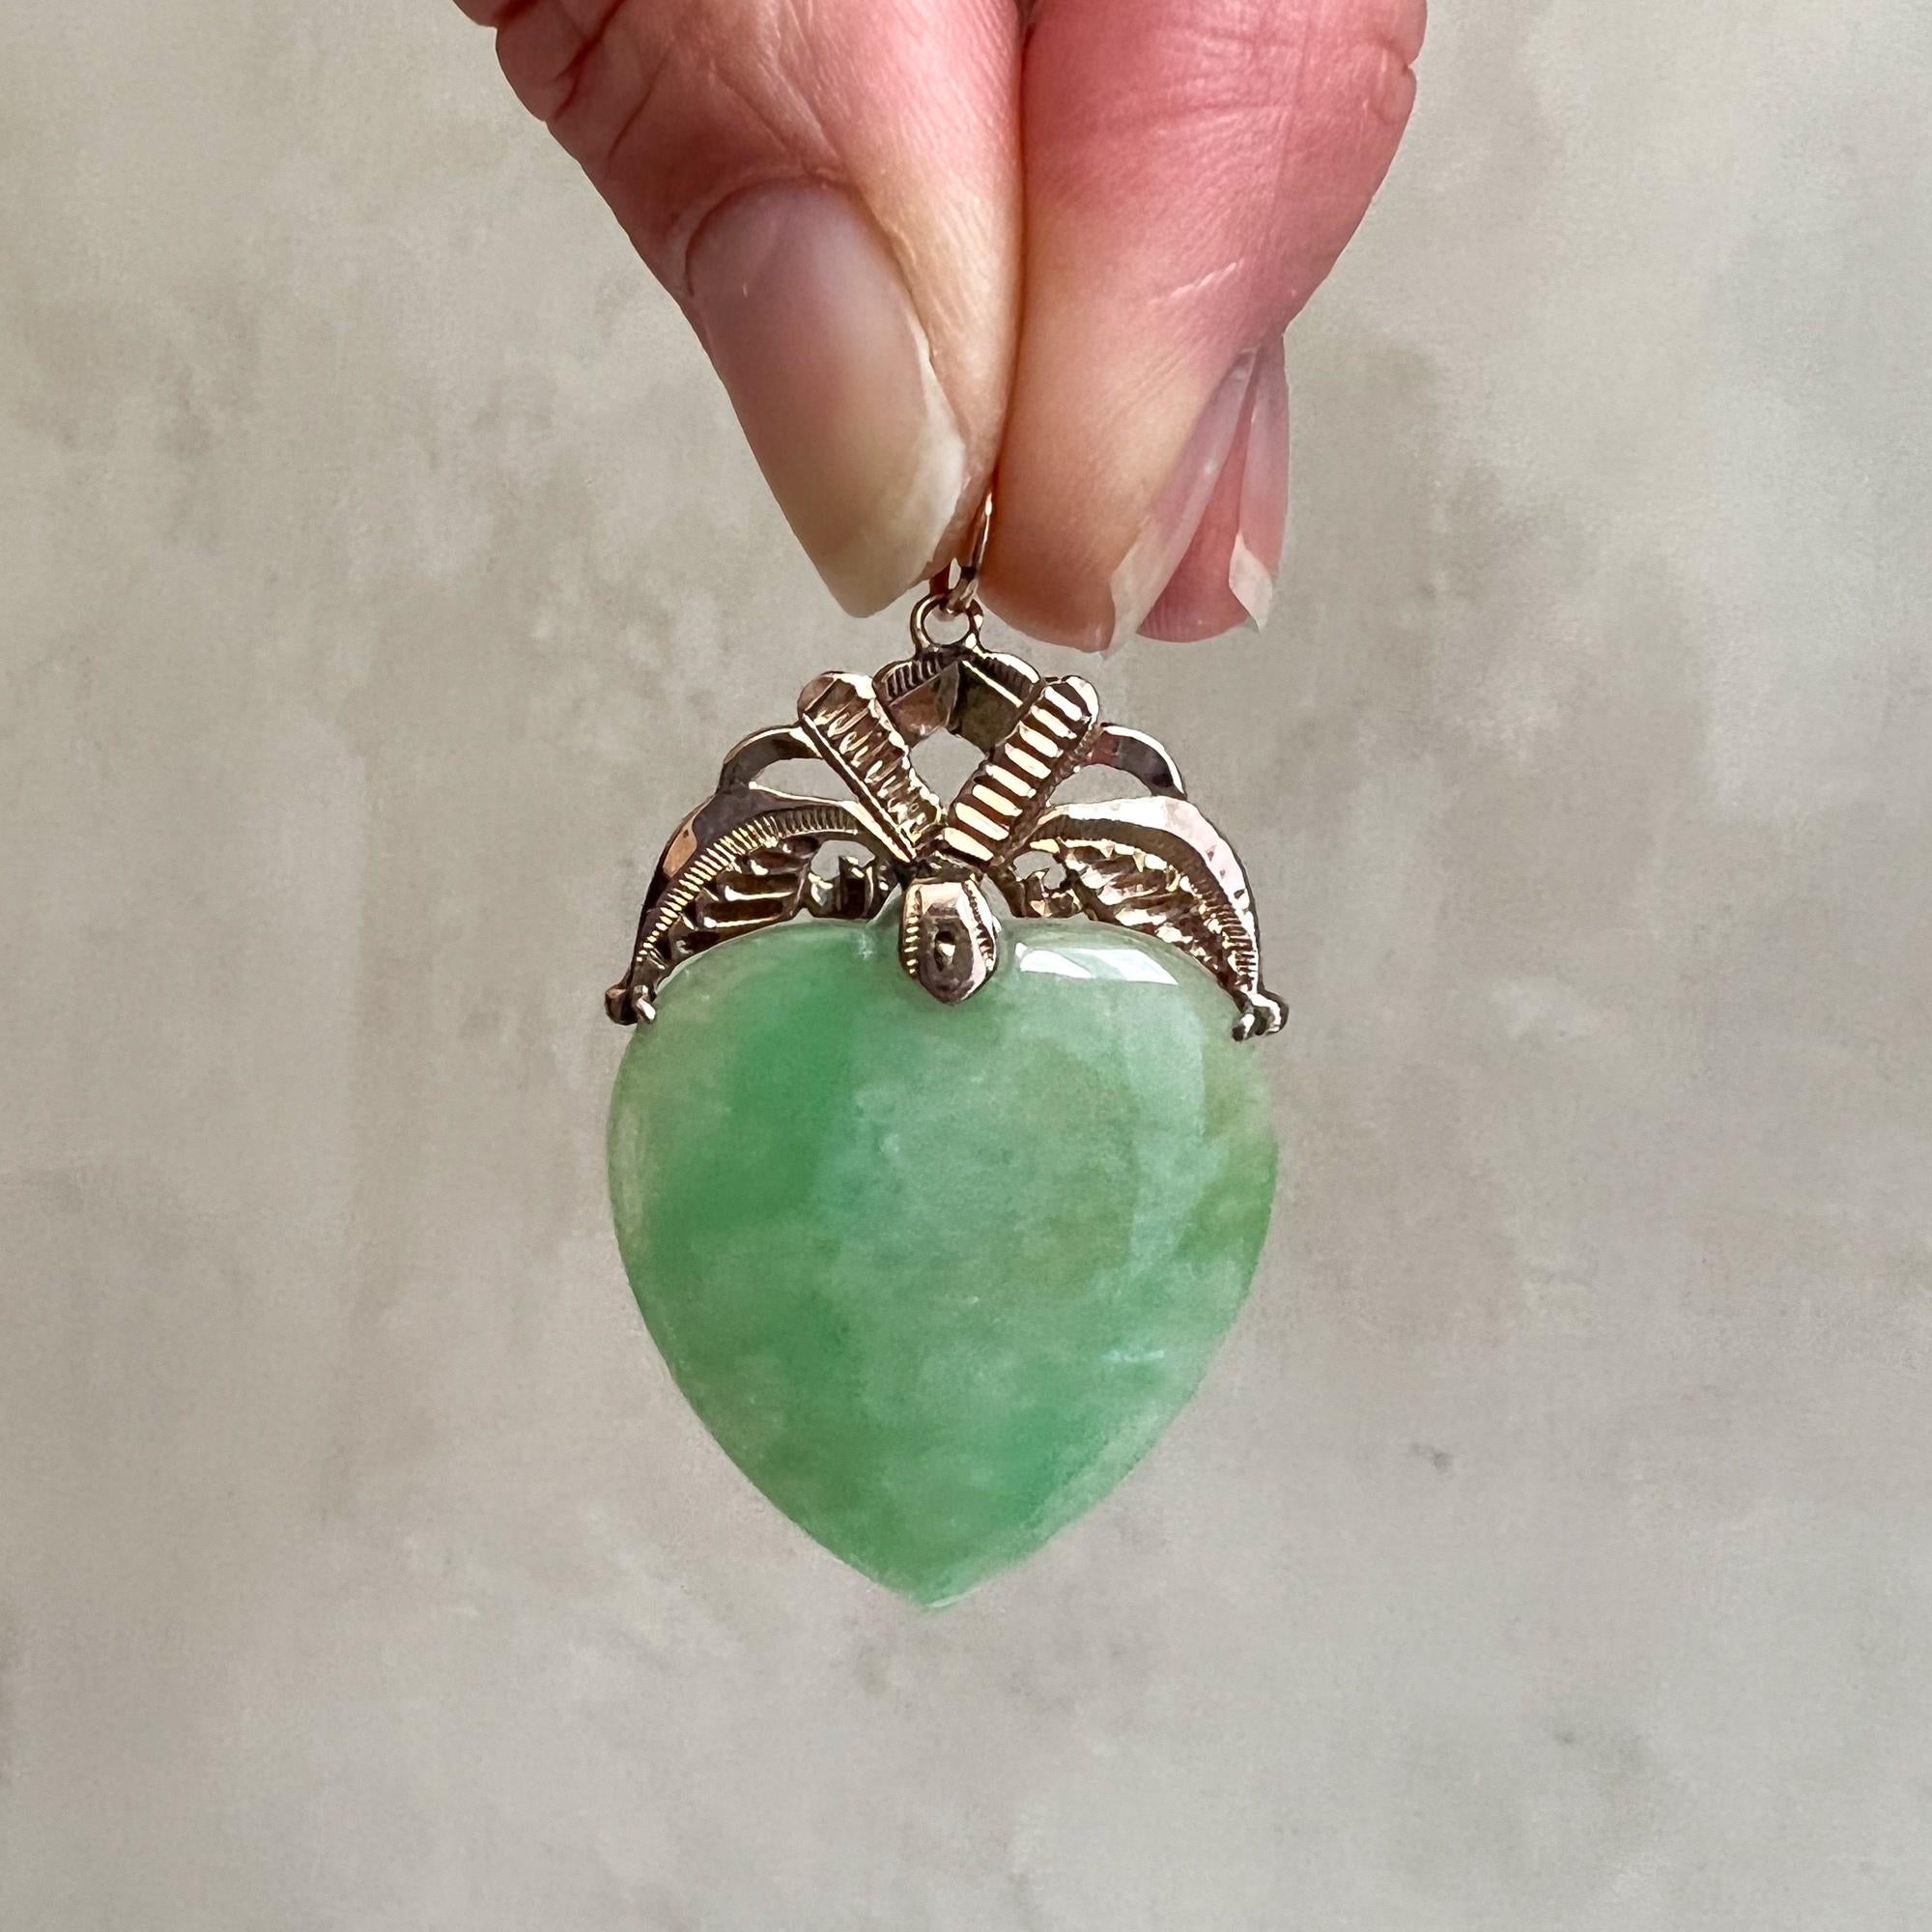 A jadeite jade heart pendant set with a 9 karat gold bail. The jadeite jade has an apple green color, the transparent jade stone is beautifully polished and of high quality. The decorated gold frame above the jade heart is beautifully engraved and